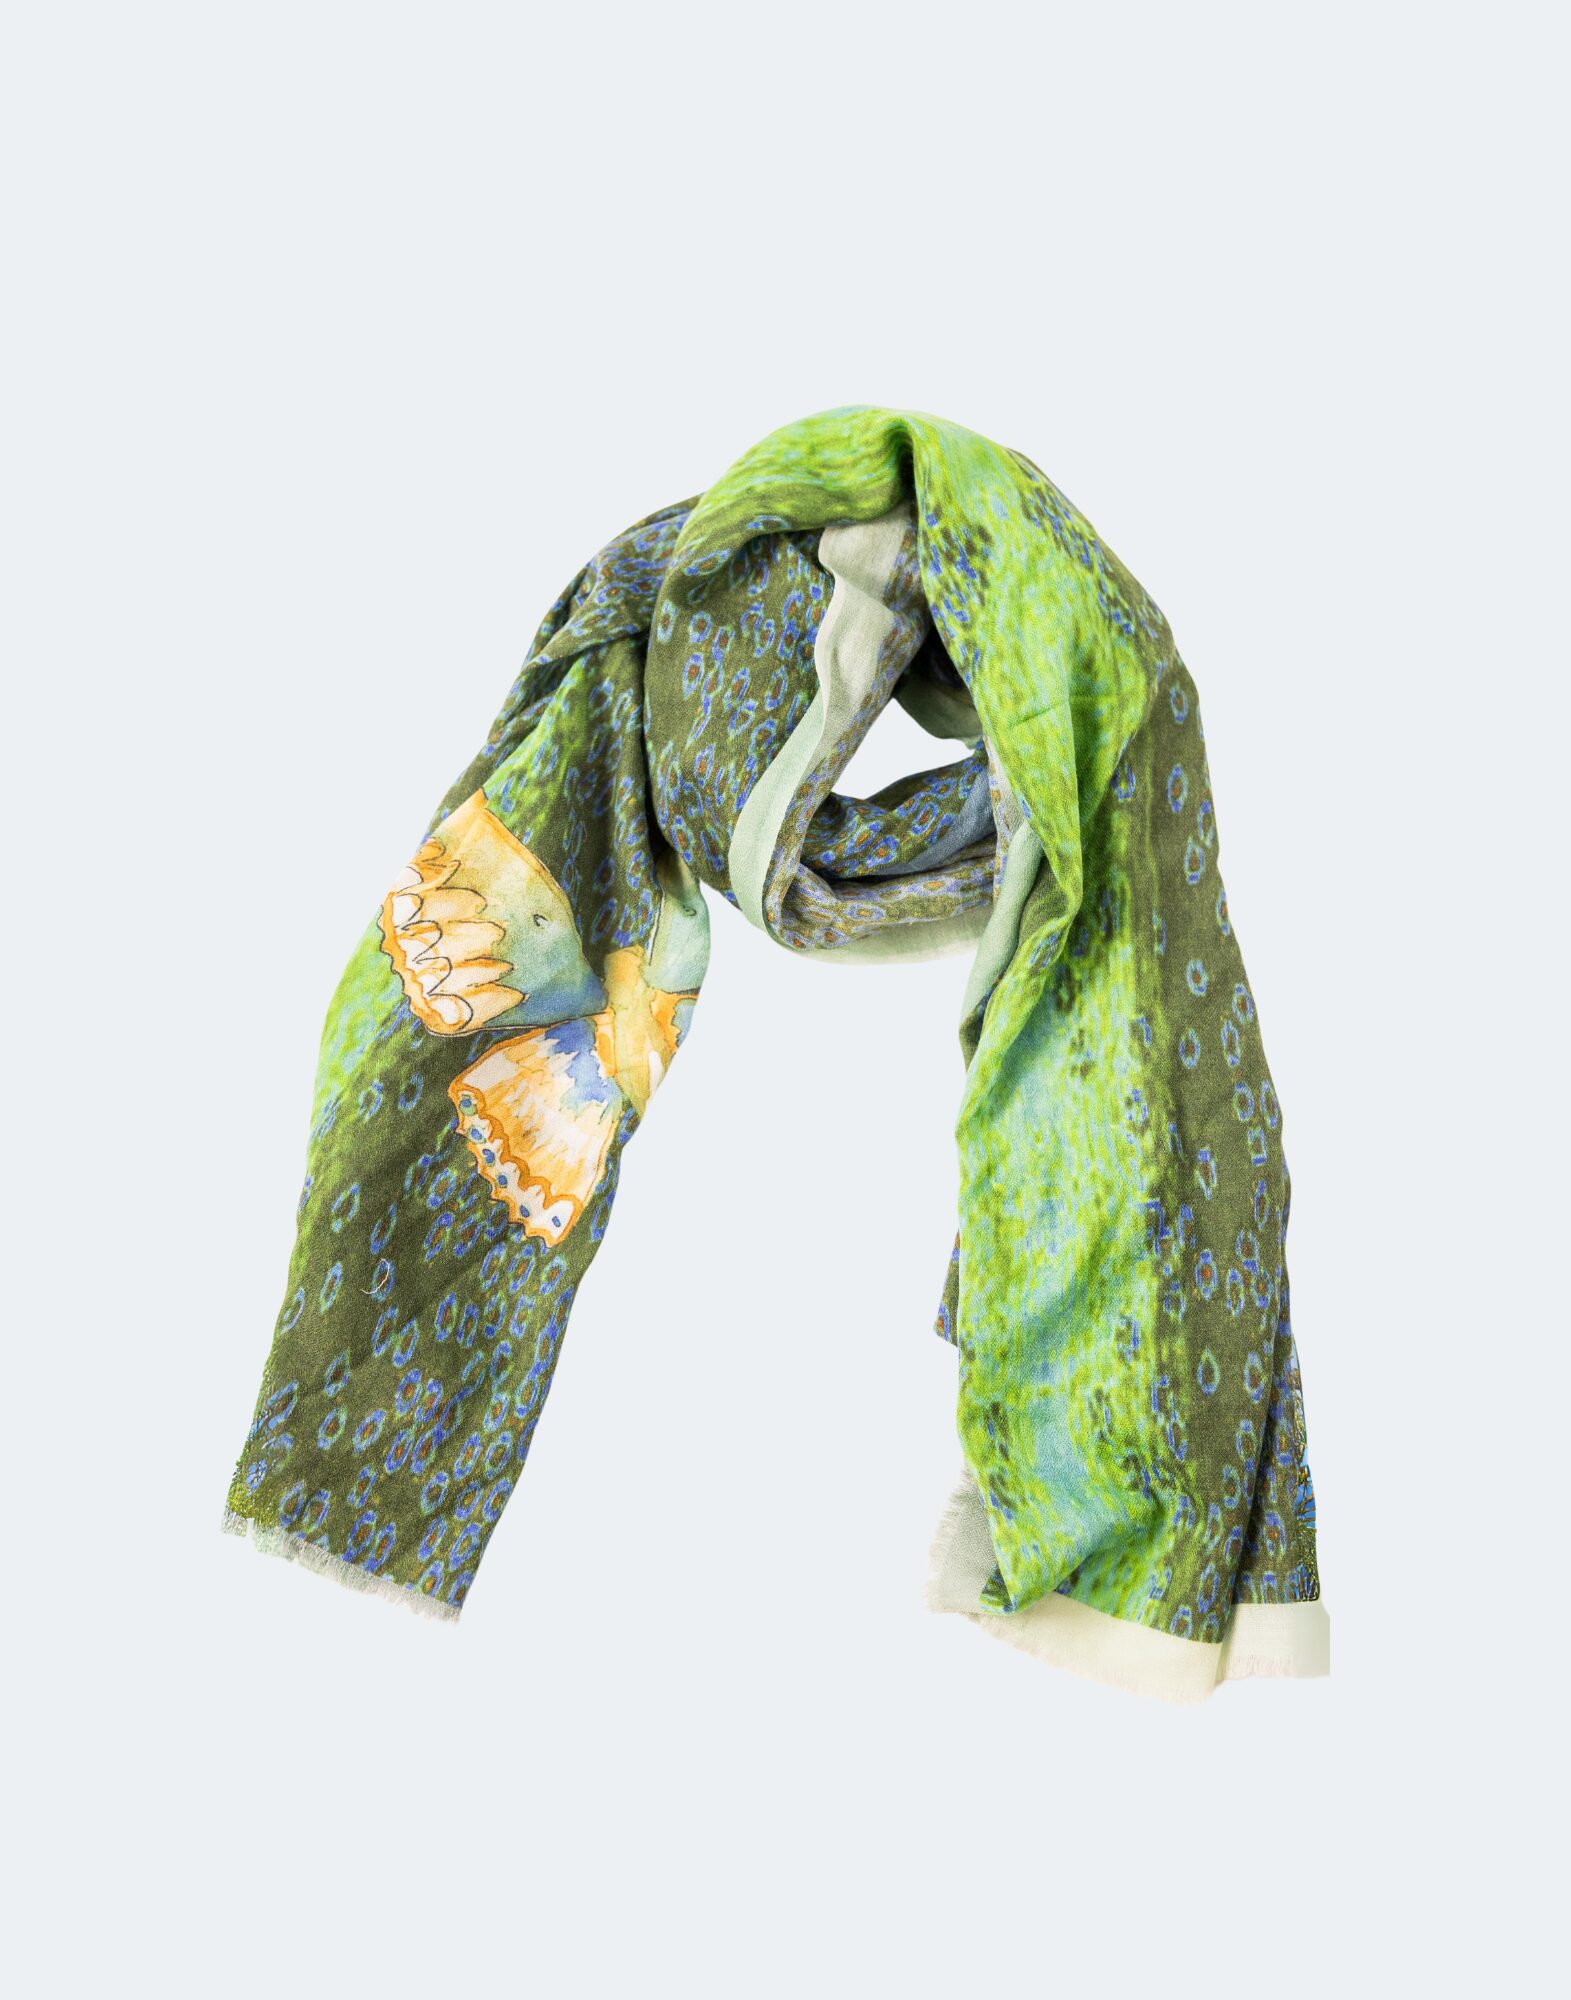 scarf in different shades of green depicting a moth